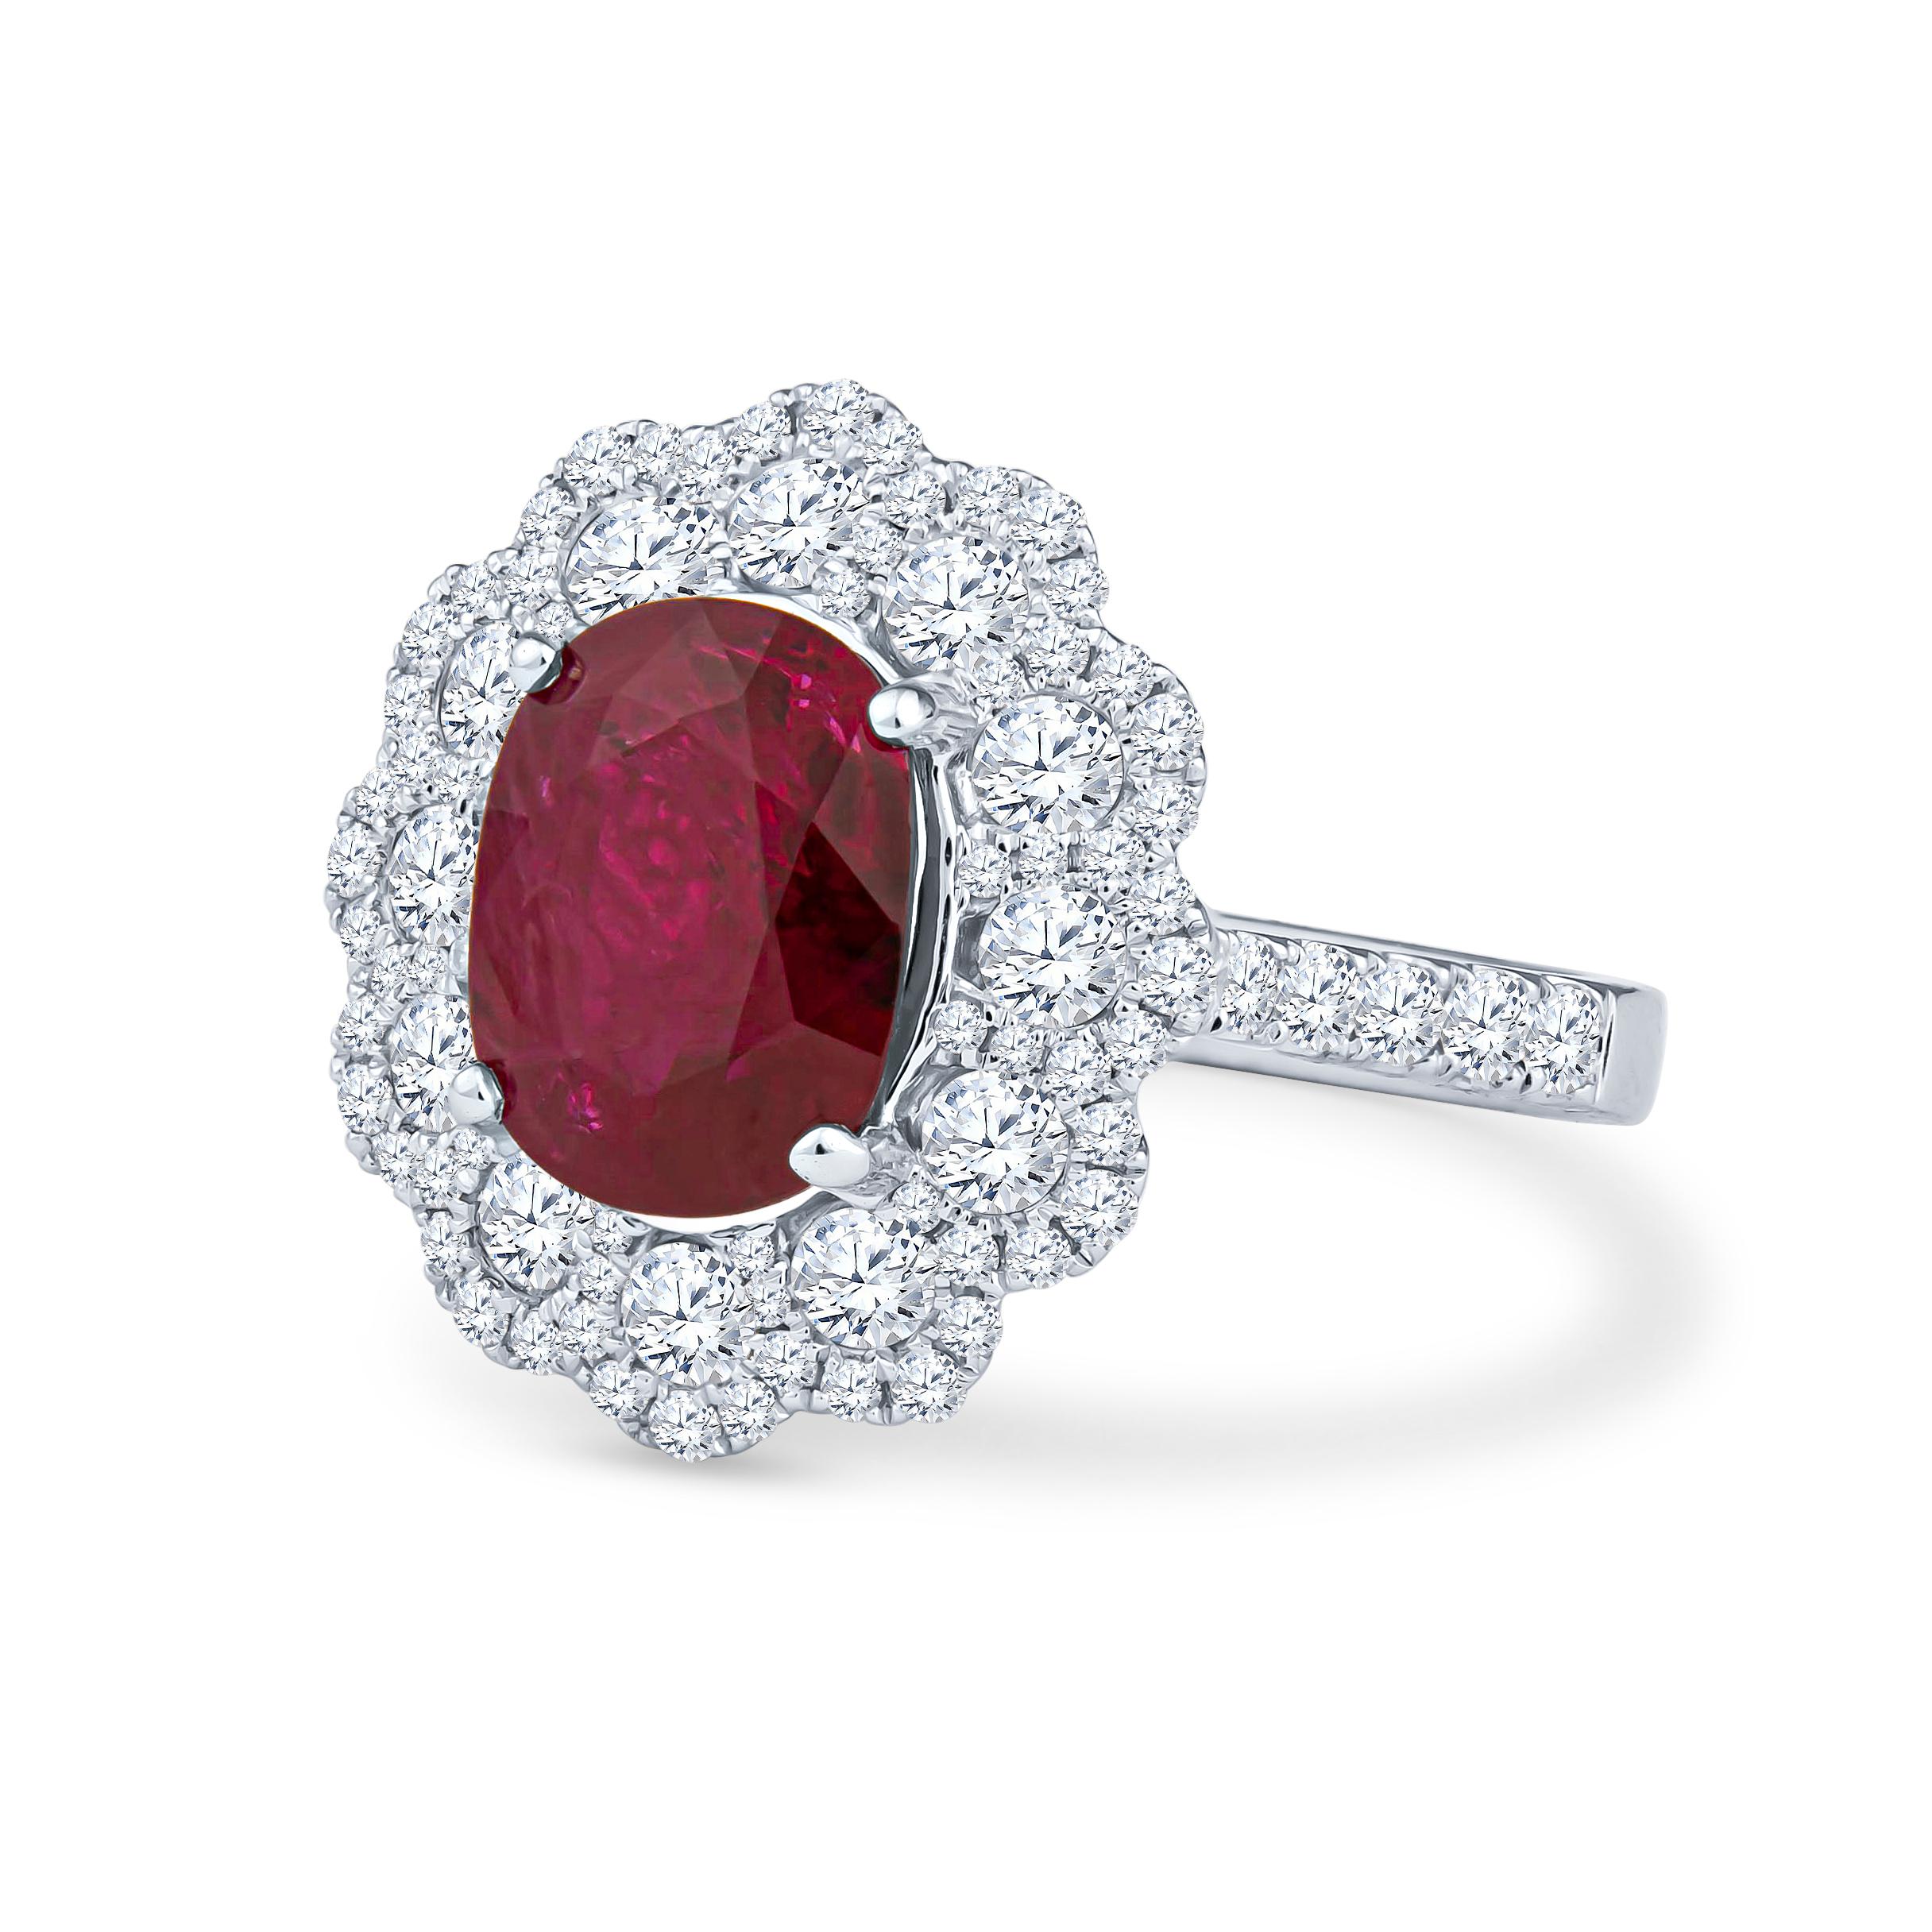 This stunning, pure red 3.41ct ruby is a natural gem from Thailand, cut in an oval shape. It is a rich, nicely saturated color that is not too dark or too light. It is set in an 18kt white gold decorative oval halo cathedral ring. Surrounding the